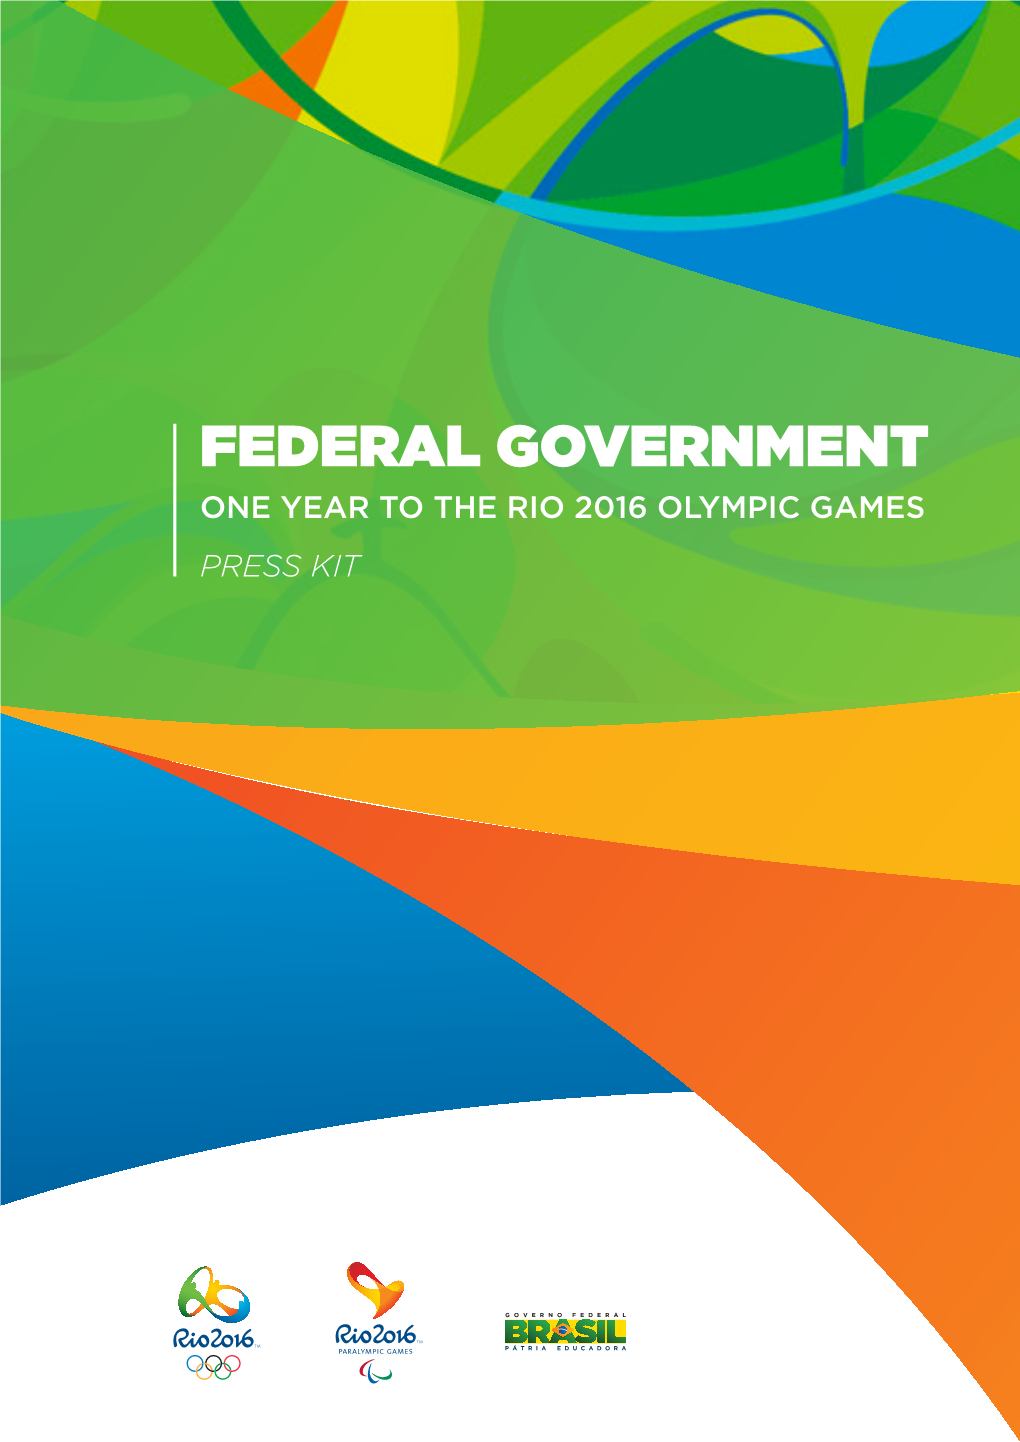 Federal Government One Year to the Rio 2016 Olympic Games Press Kit